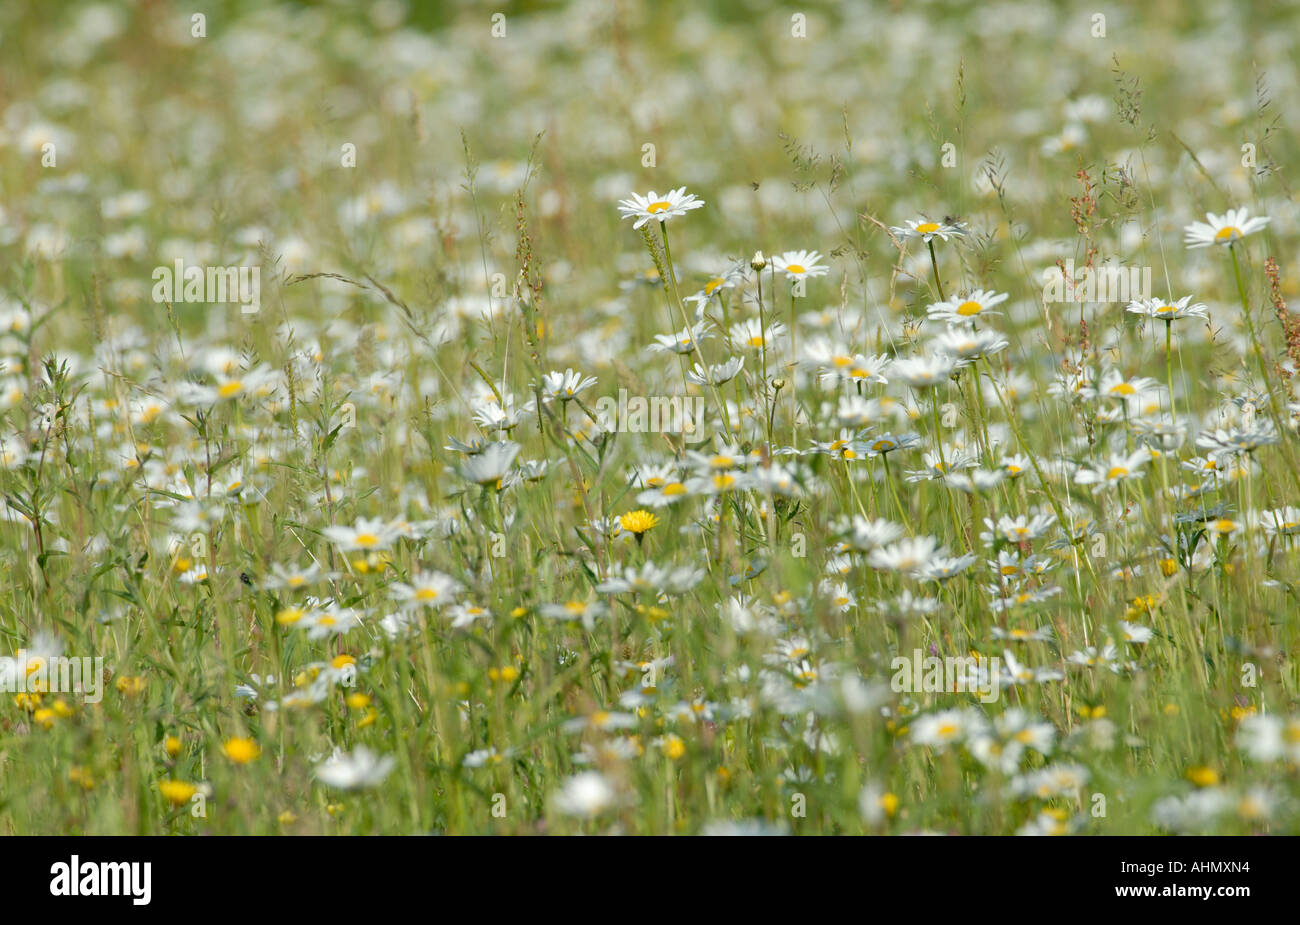 A field of white and yellow oxeye daisy Chrythanthemum leucanthemum Leucanthemum vulgare flowers Stock Photo